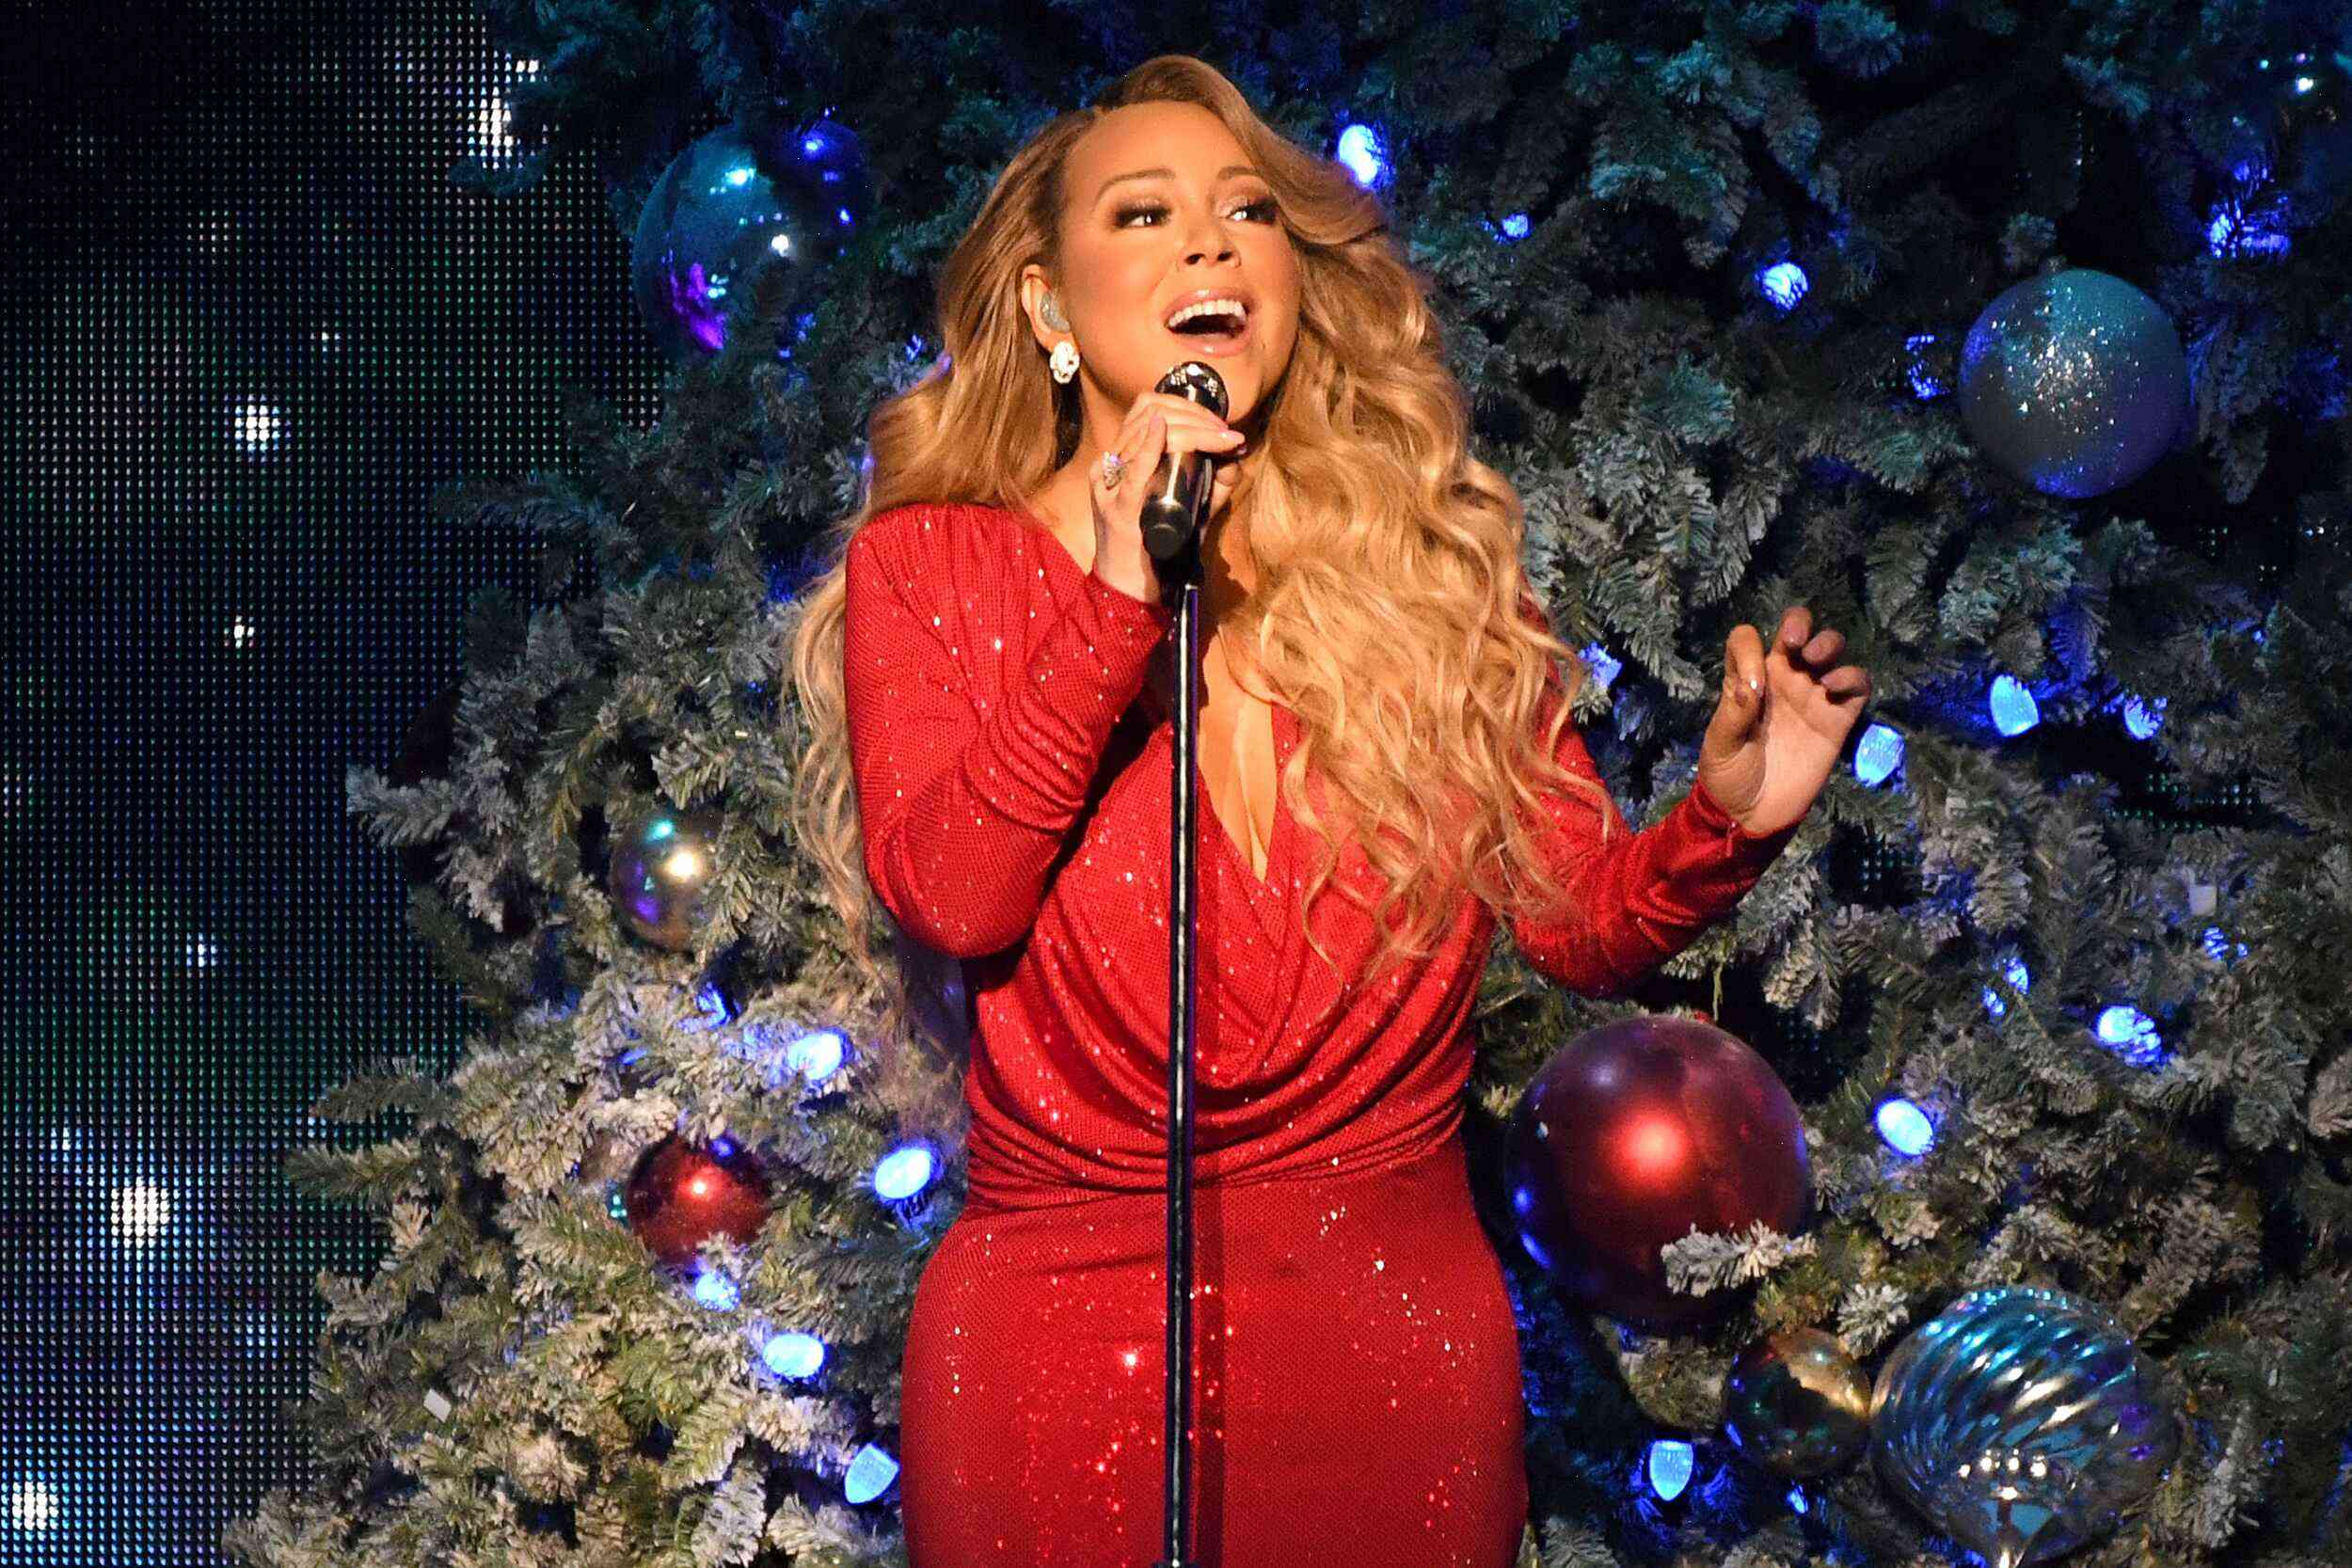 Mariah Carey Christmas hits from way back to the present